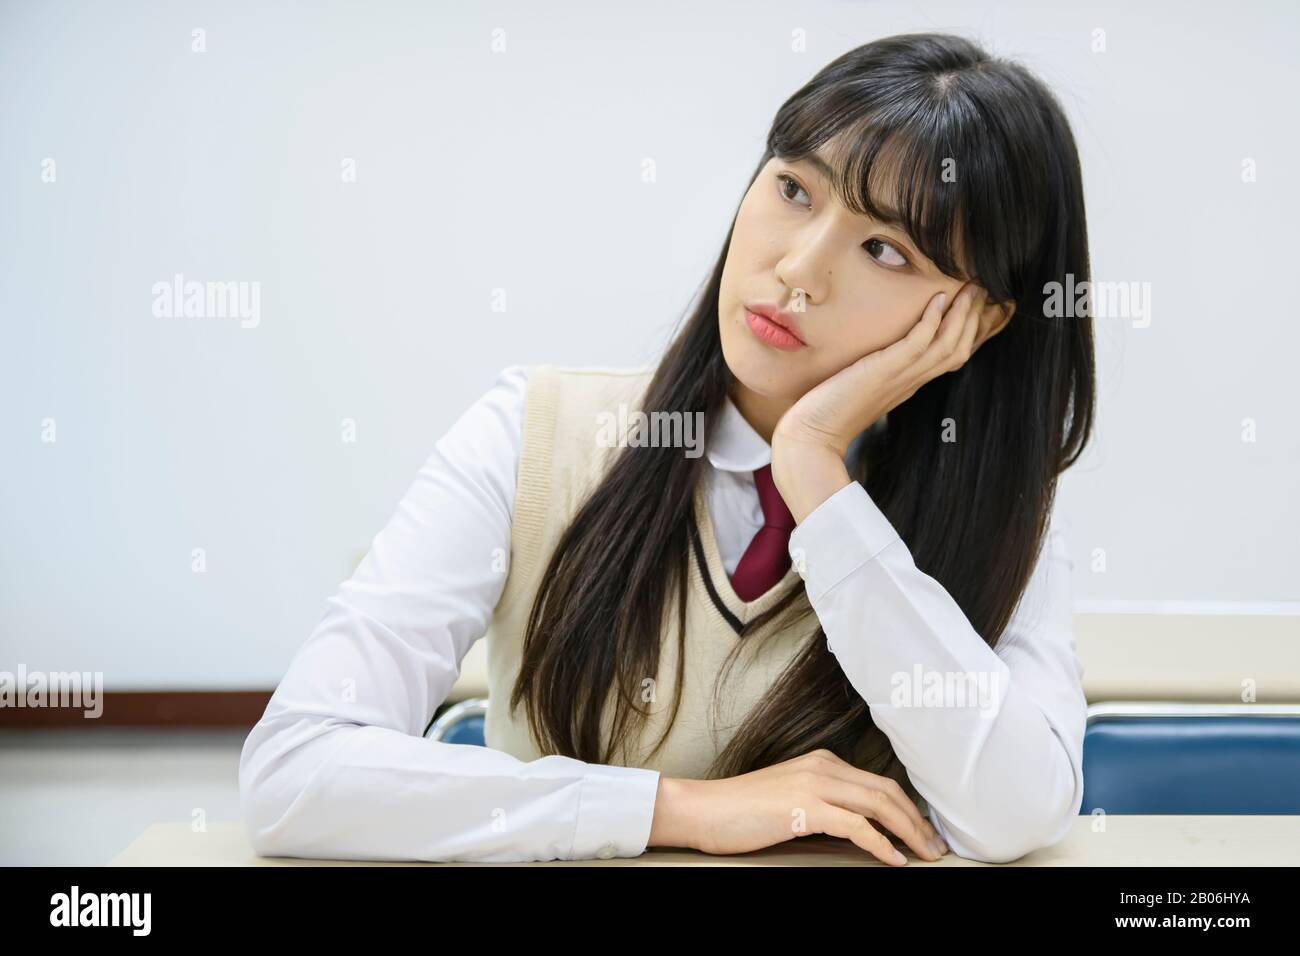 High school student's daily life, Asian teenage students wearing uniform on college with friends 140 Stock Photo